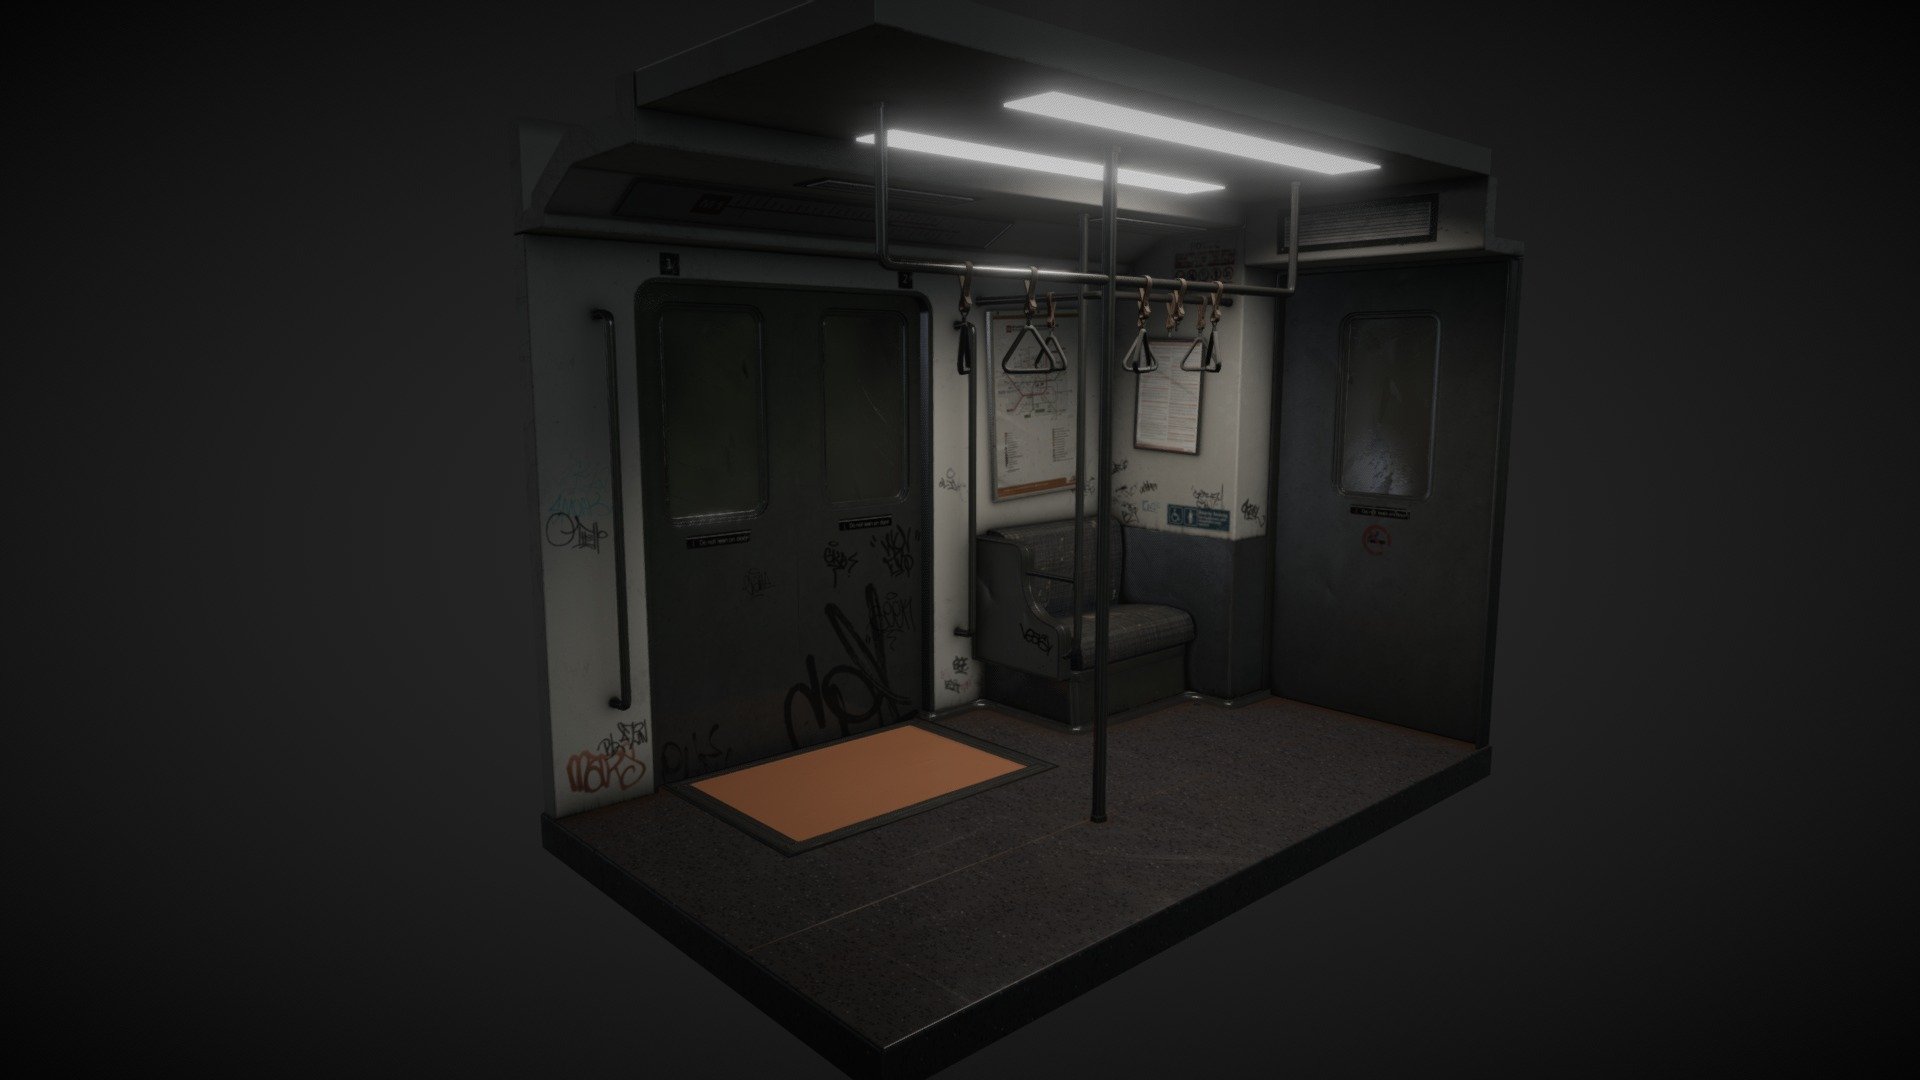 Hi everyone, 
this is my first environment. I wanted to recreate the Subway car interior.
I used Maya and Substance Painter 3d model